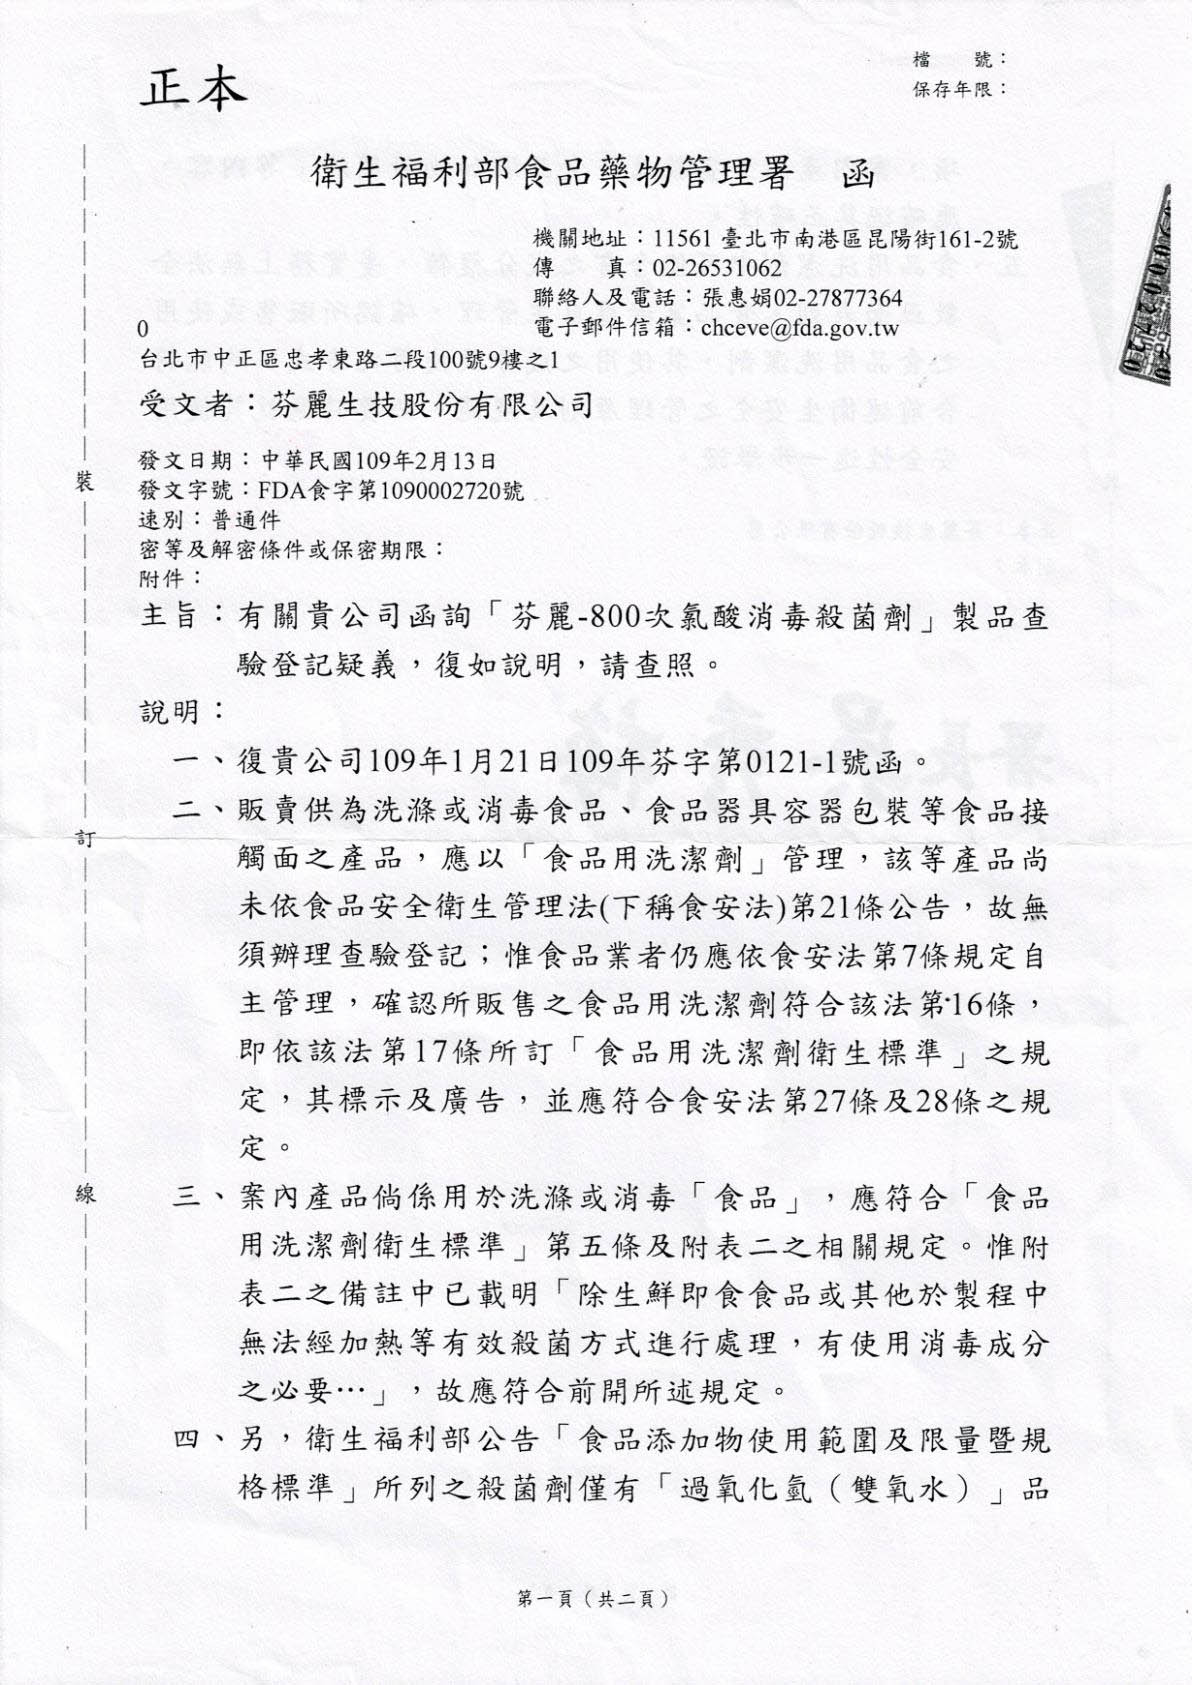 Taiwan FDA and EPA Government Letter